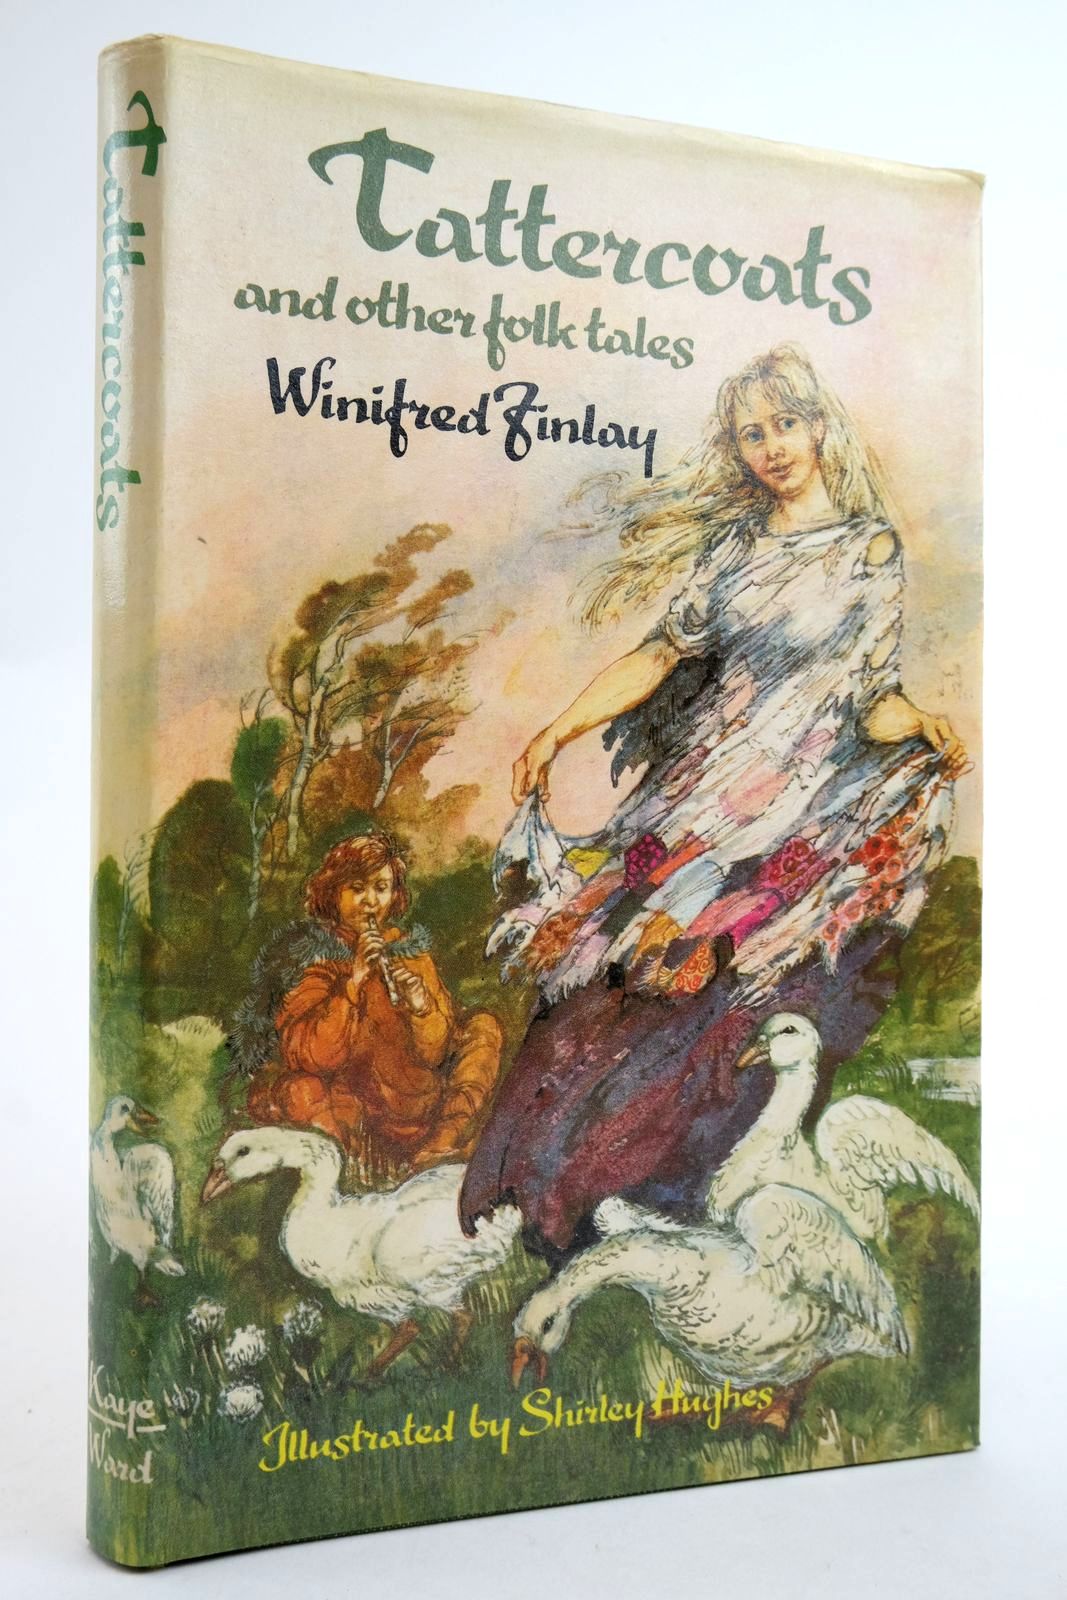 Photo of TATTERCOATS AND OTHER FOLK TALES written by Finlay, Winifred illustrated by Hughes, Shirley published by Kaye & Ward (STOCK CODE: 2135460)  for sale by Stella & Rose's Books